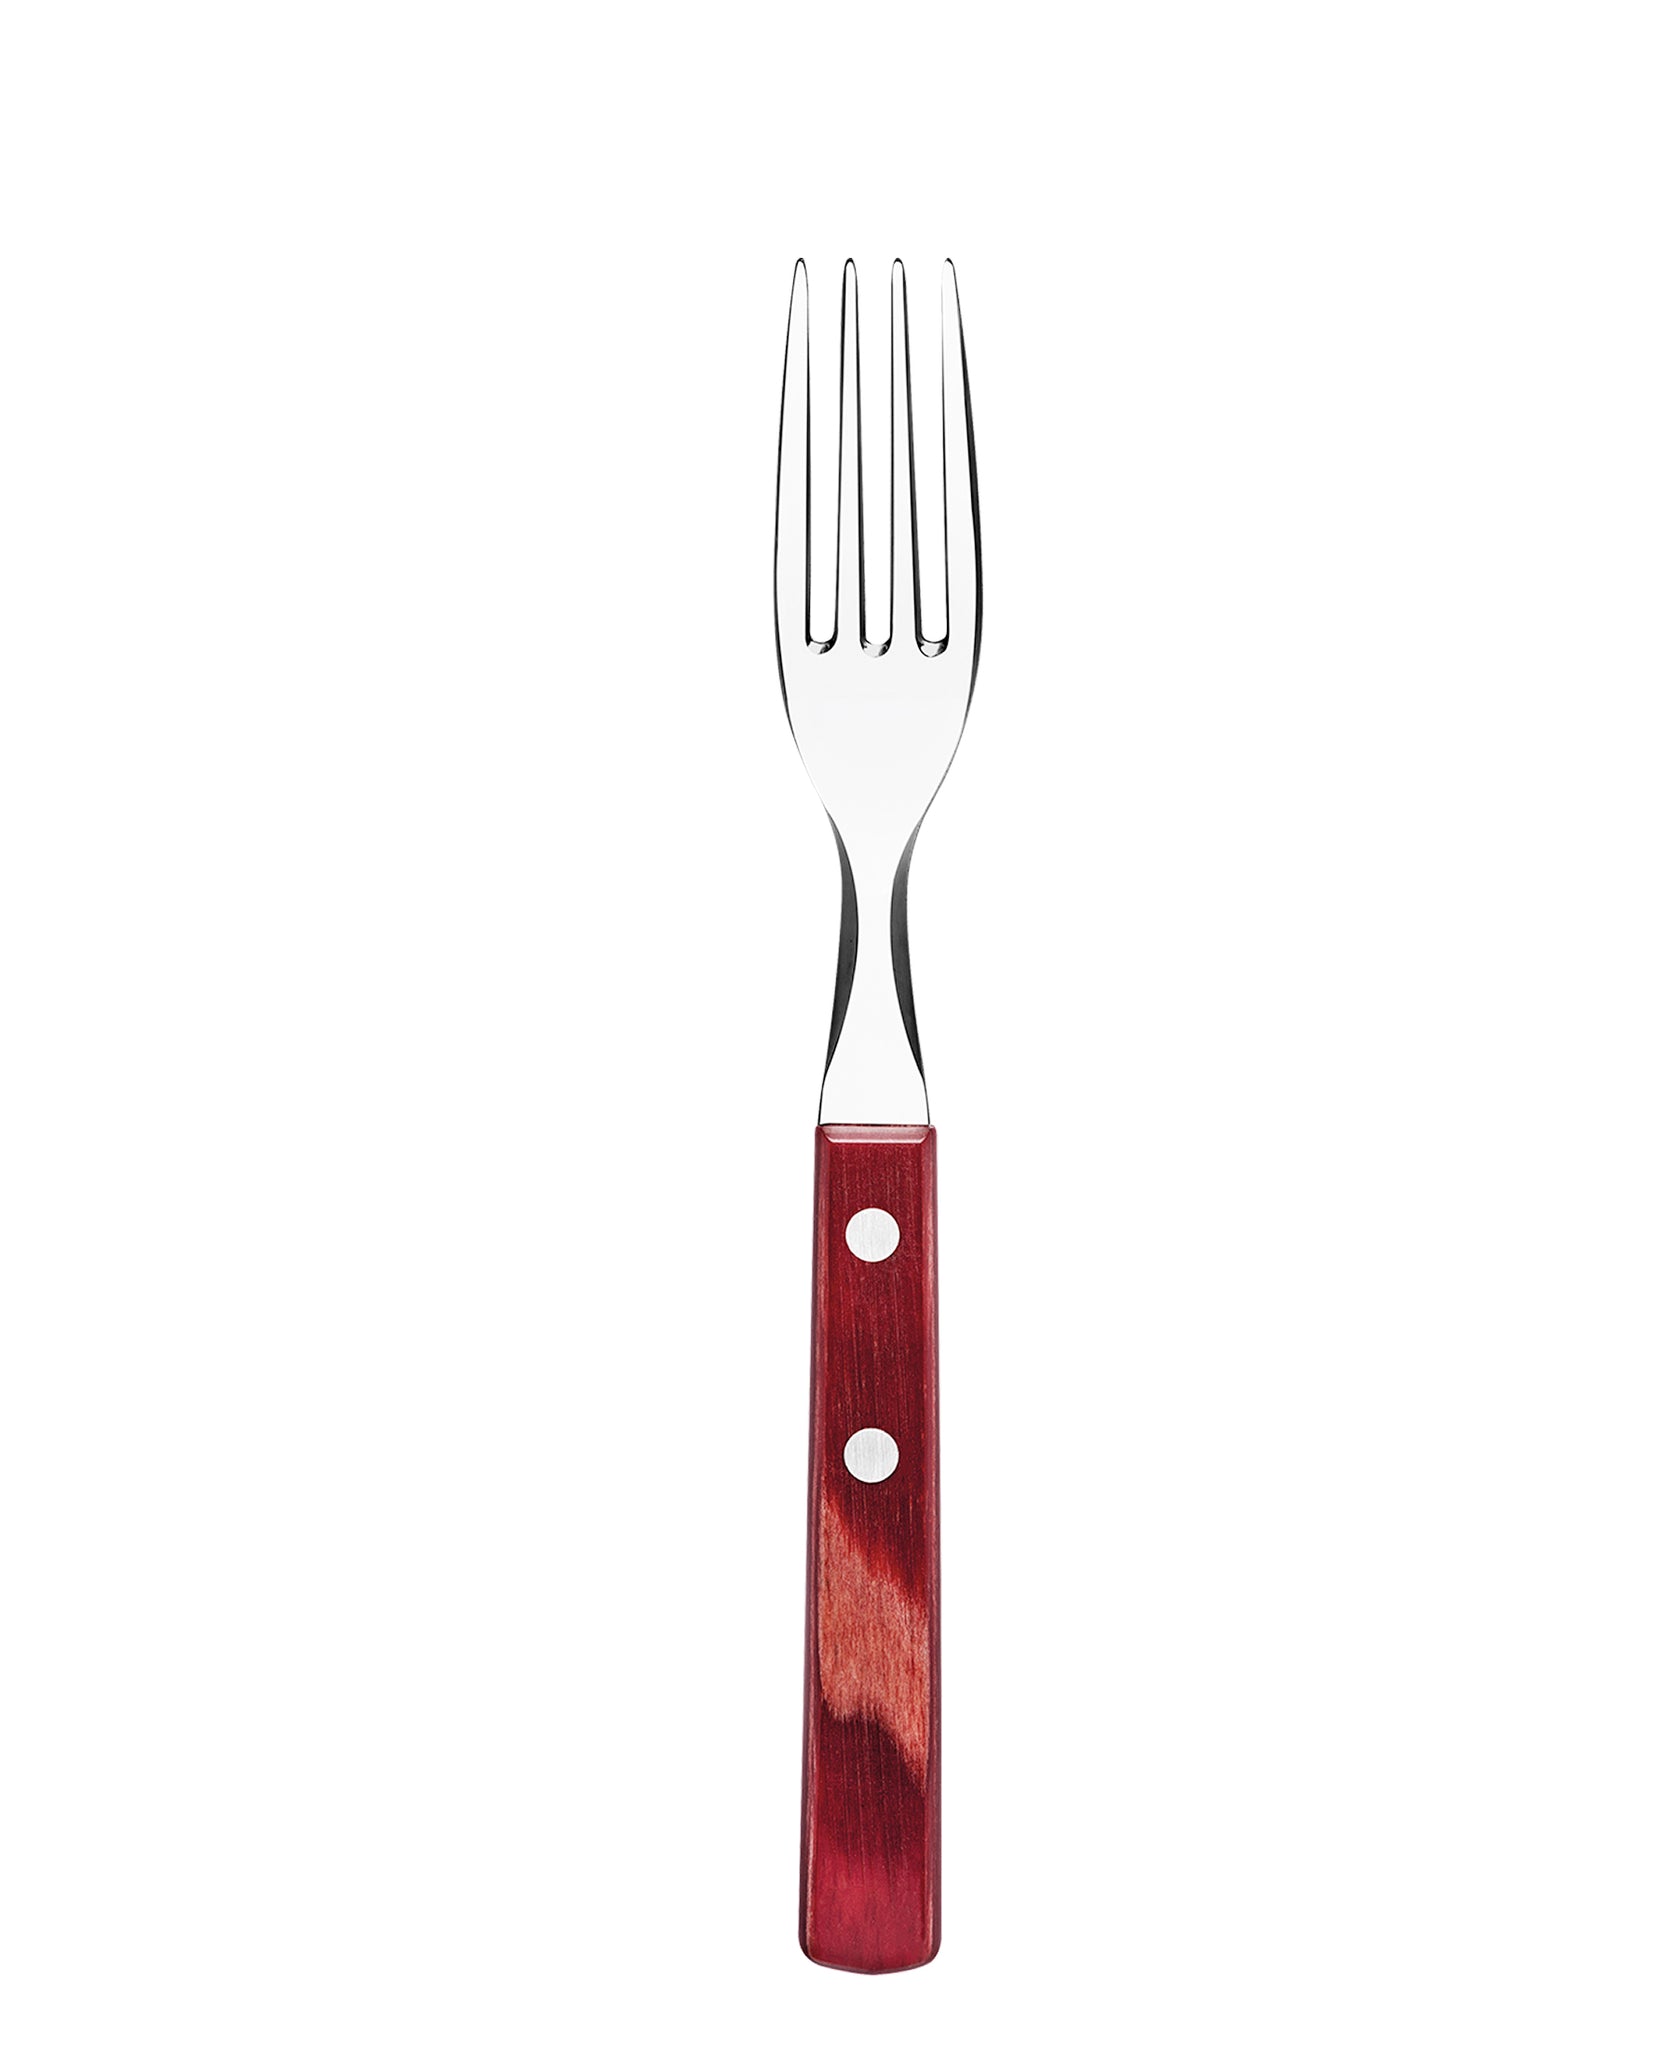 Tramontina 6 Piece Table Forks - Red